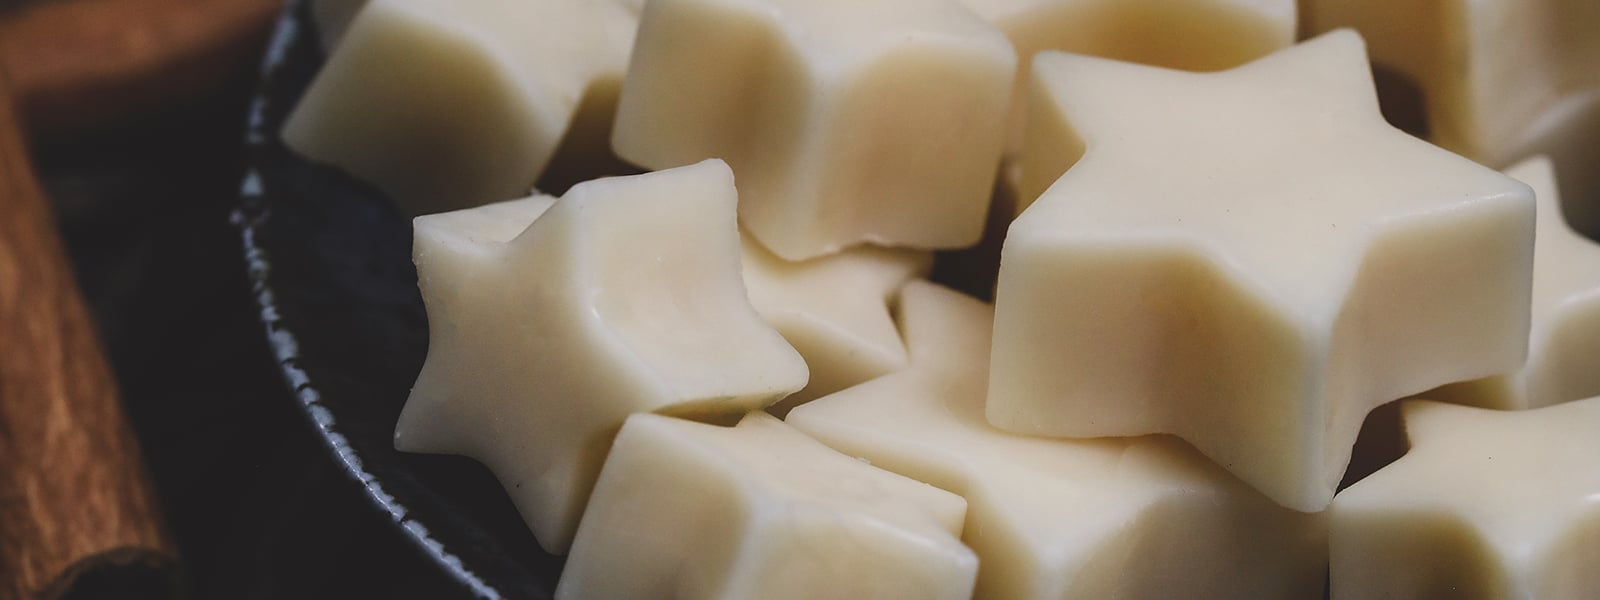 11 Healthy And Eco-Friendly DIY Scented Wax Melts - Shelterness